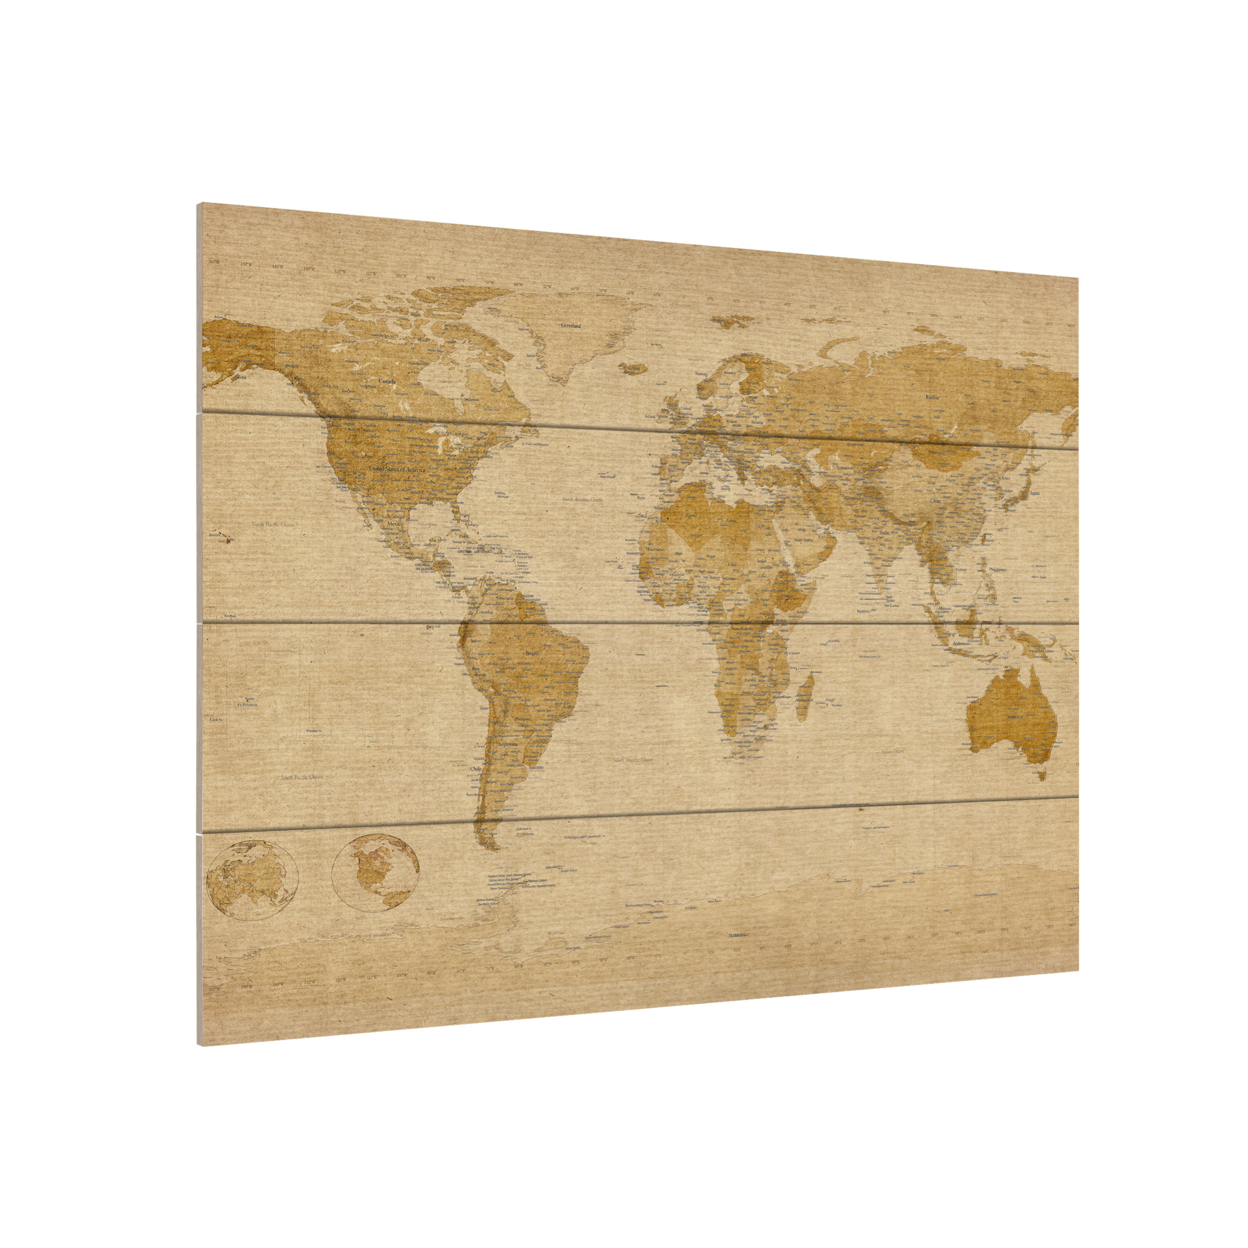 Wall Art 12 X 16 Inches Titled Antique World Map Ready To Hang Printed On Wooden Planks